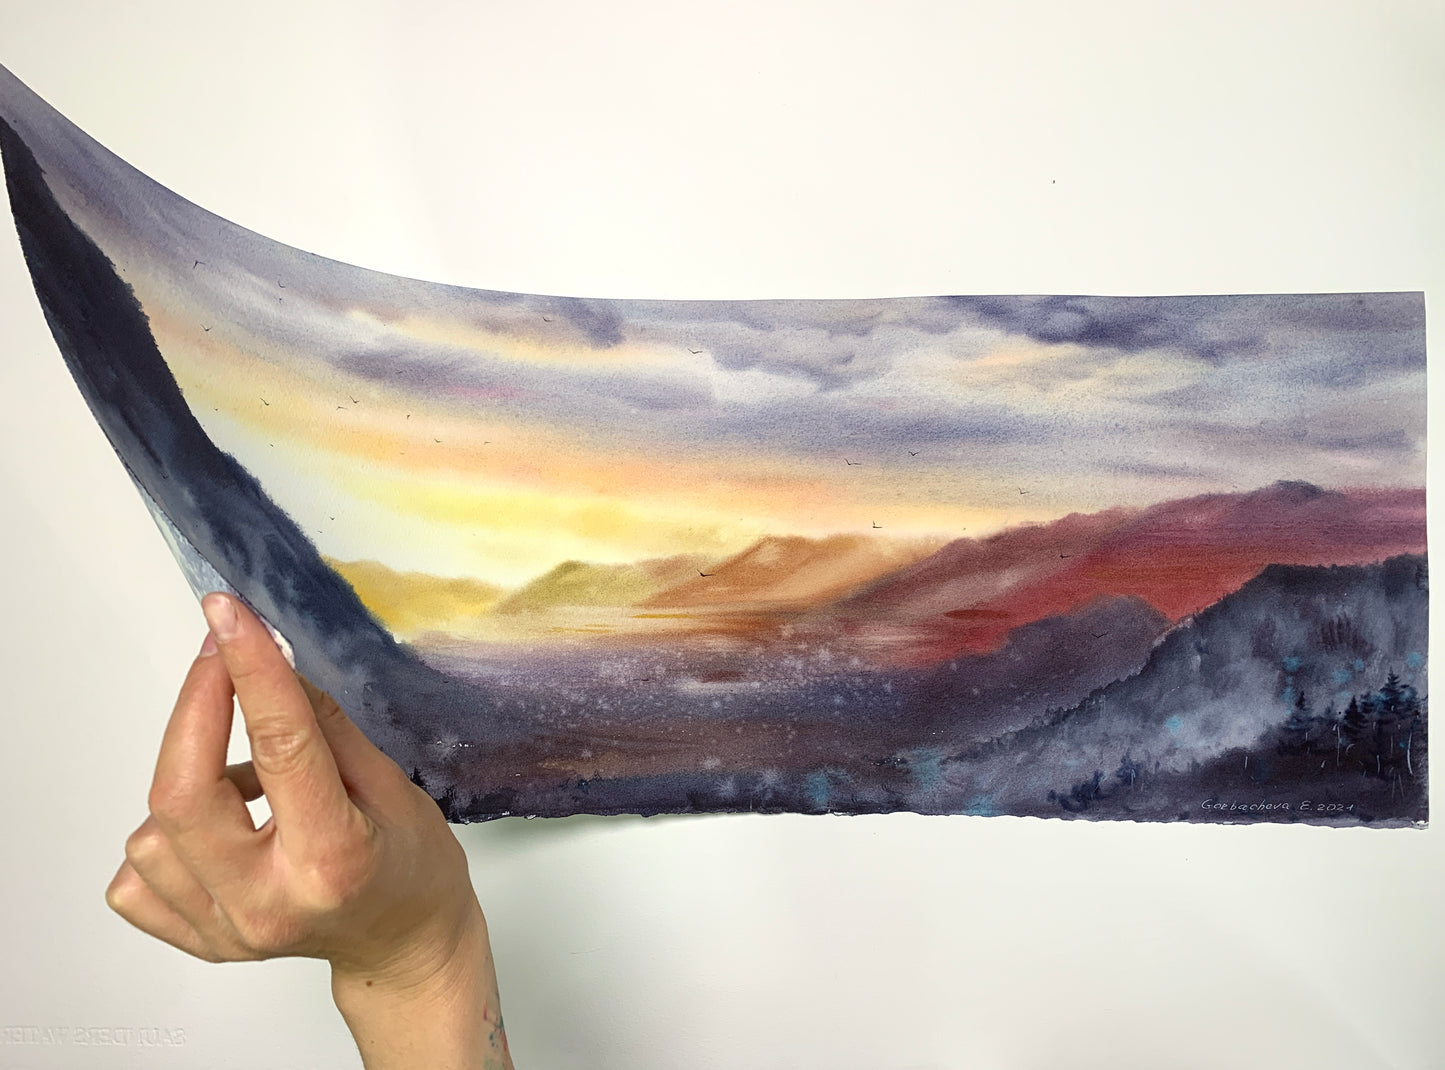 Panoramic Mountain Painting Watercolor Original - Sunset in the mountains #3 - 10 x 27 in